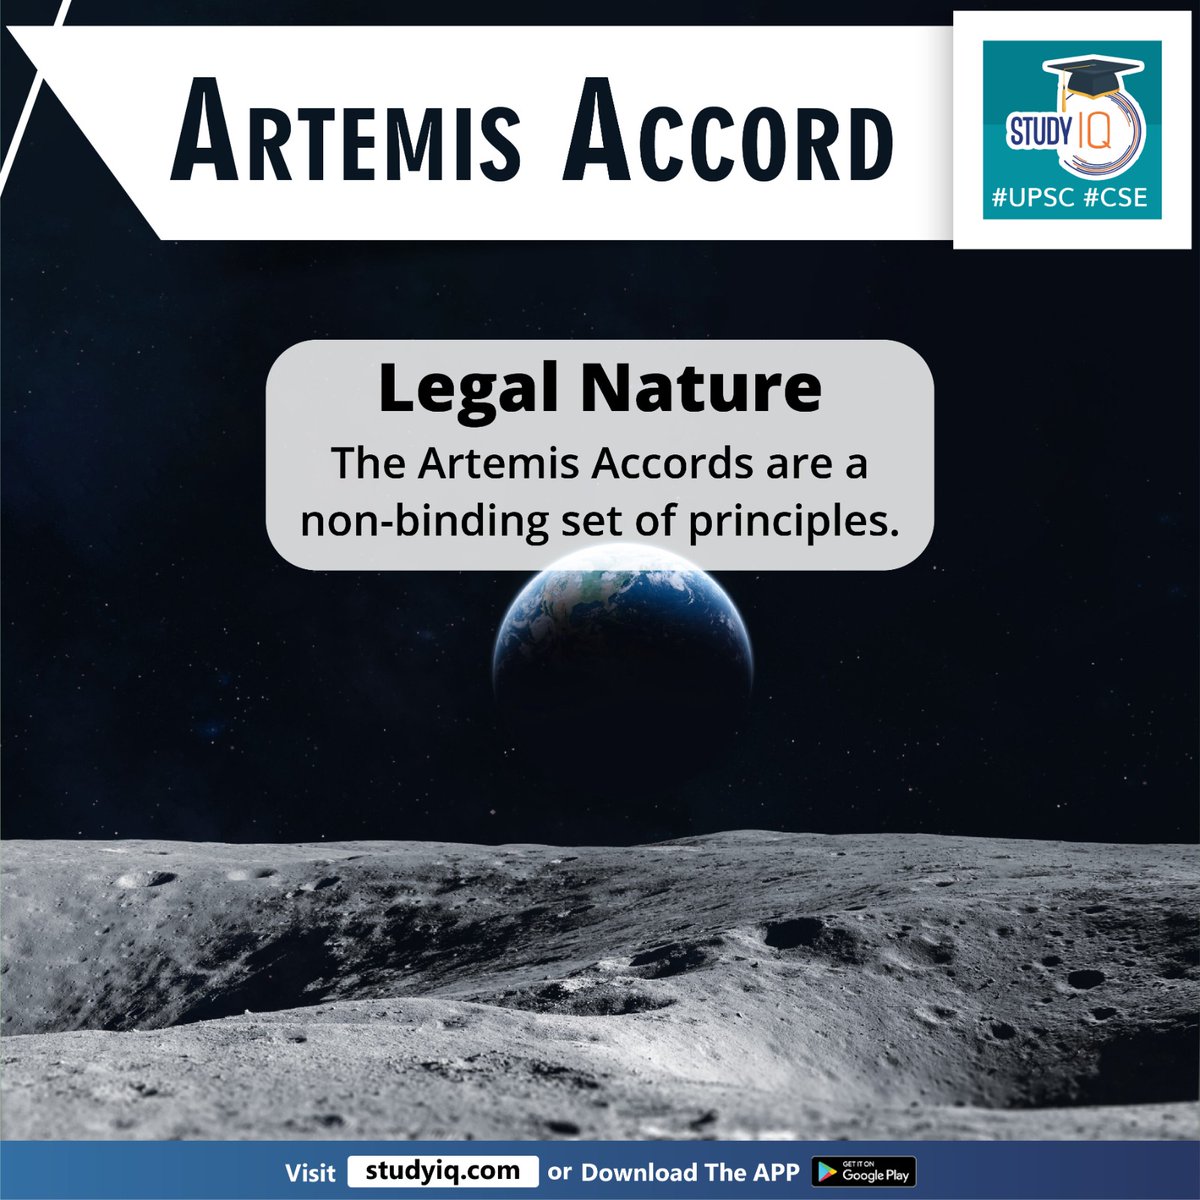 Artemis Accord

#artemisaccord #india #civilspaceexploration #spaceexploration #usa #outerspacetreaty #spacetreaty #spaceassets #spacemissions #scientificdata #explorationofspace #australia #bahrain #brazil #canda #colombia #france #italy #israel #japan #luxembourg #mexico